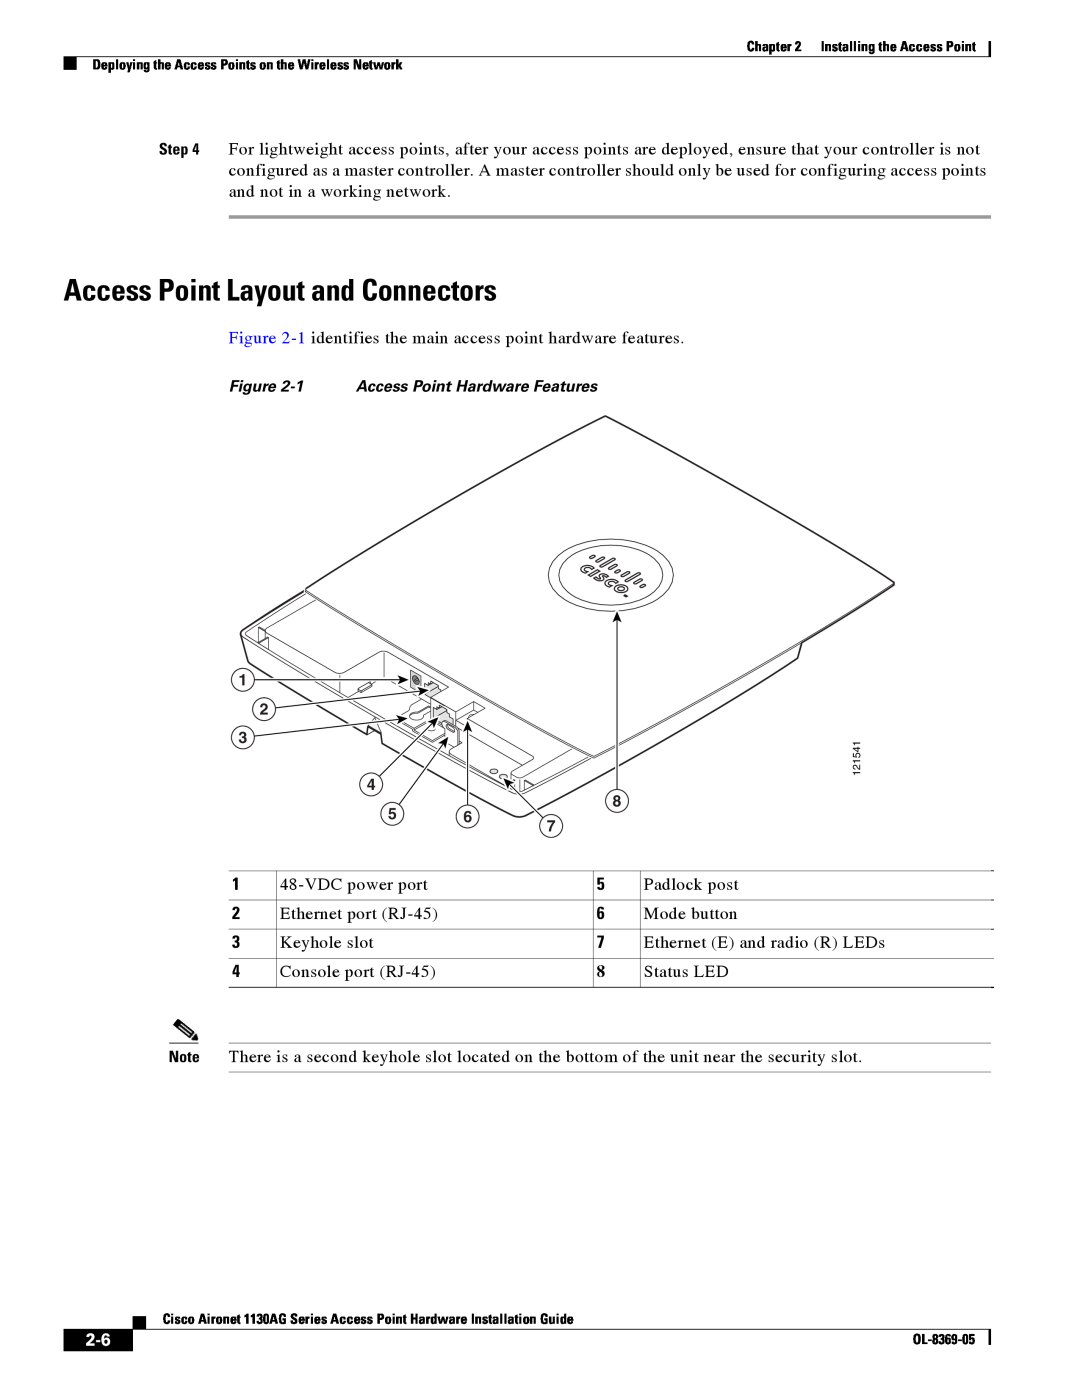 Cisco Systems 1130AG manual Access Point Layout and Connectors, 1 Access Point Hardware Features 